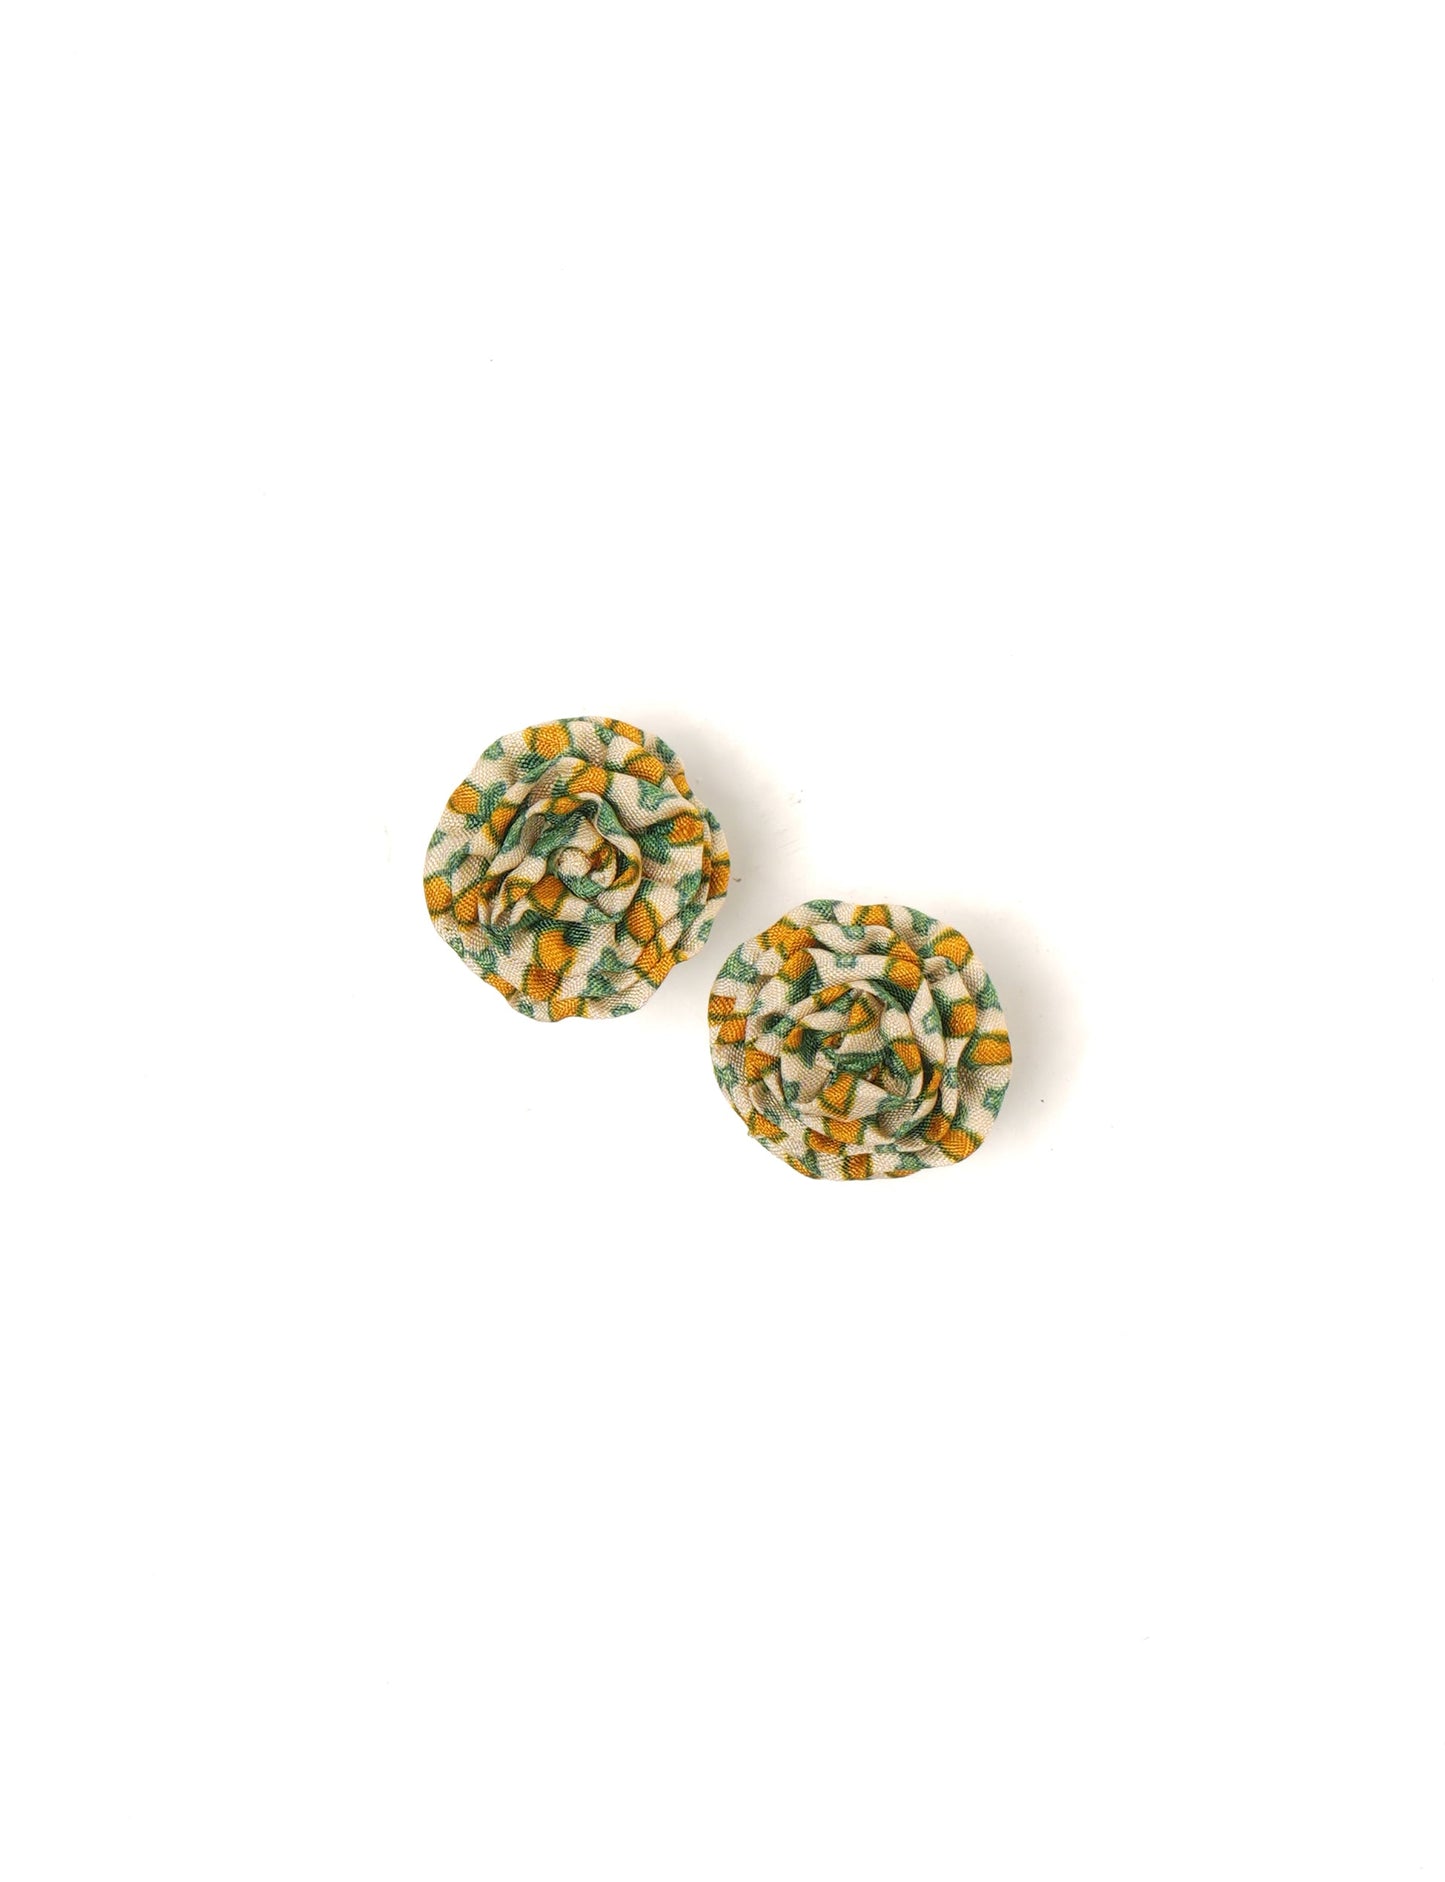 Elevate your elegance with Ruffle Earrings, delicate fabric studs showcasing Indian Aari embroidery. These eco-friendly earrings feature intricate floral patterns, embodying ethical and green fashion. Hypoallergenic and skin-friendly, our studs make a stylish statement in sustainable accessorizing."




